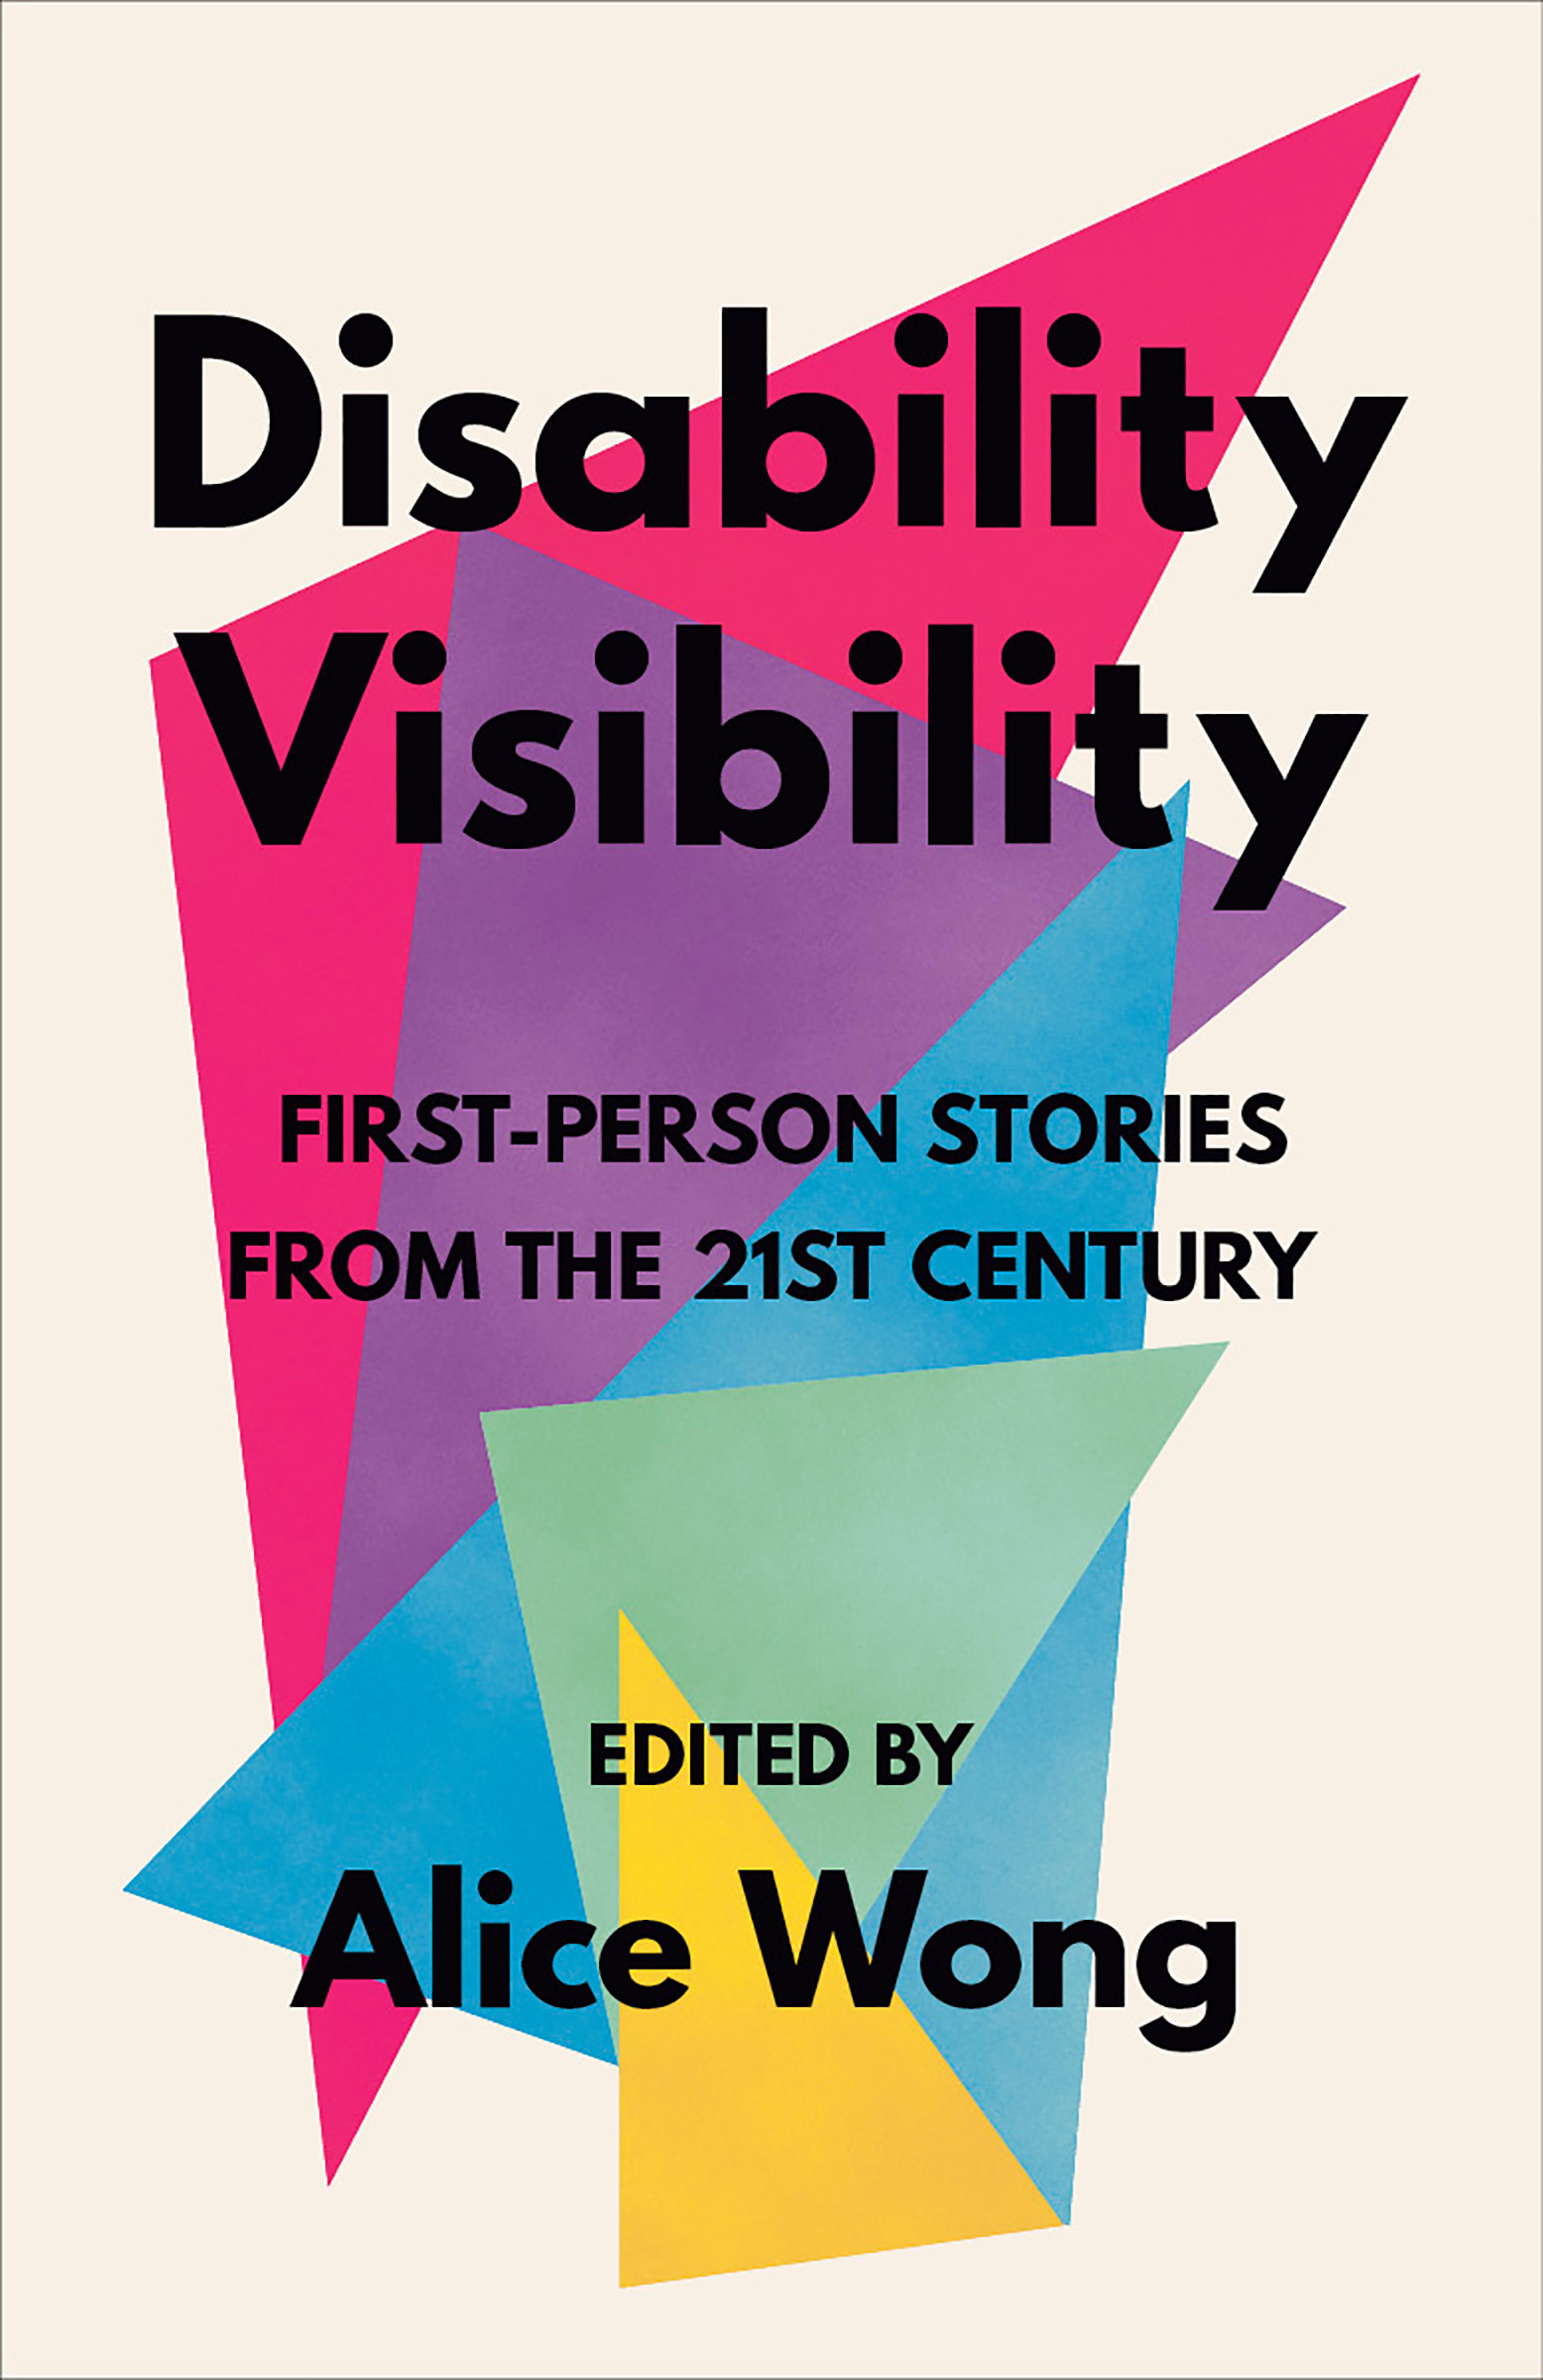 Alice Wong: Disability Visibility (2020, Vintage)